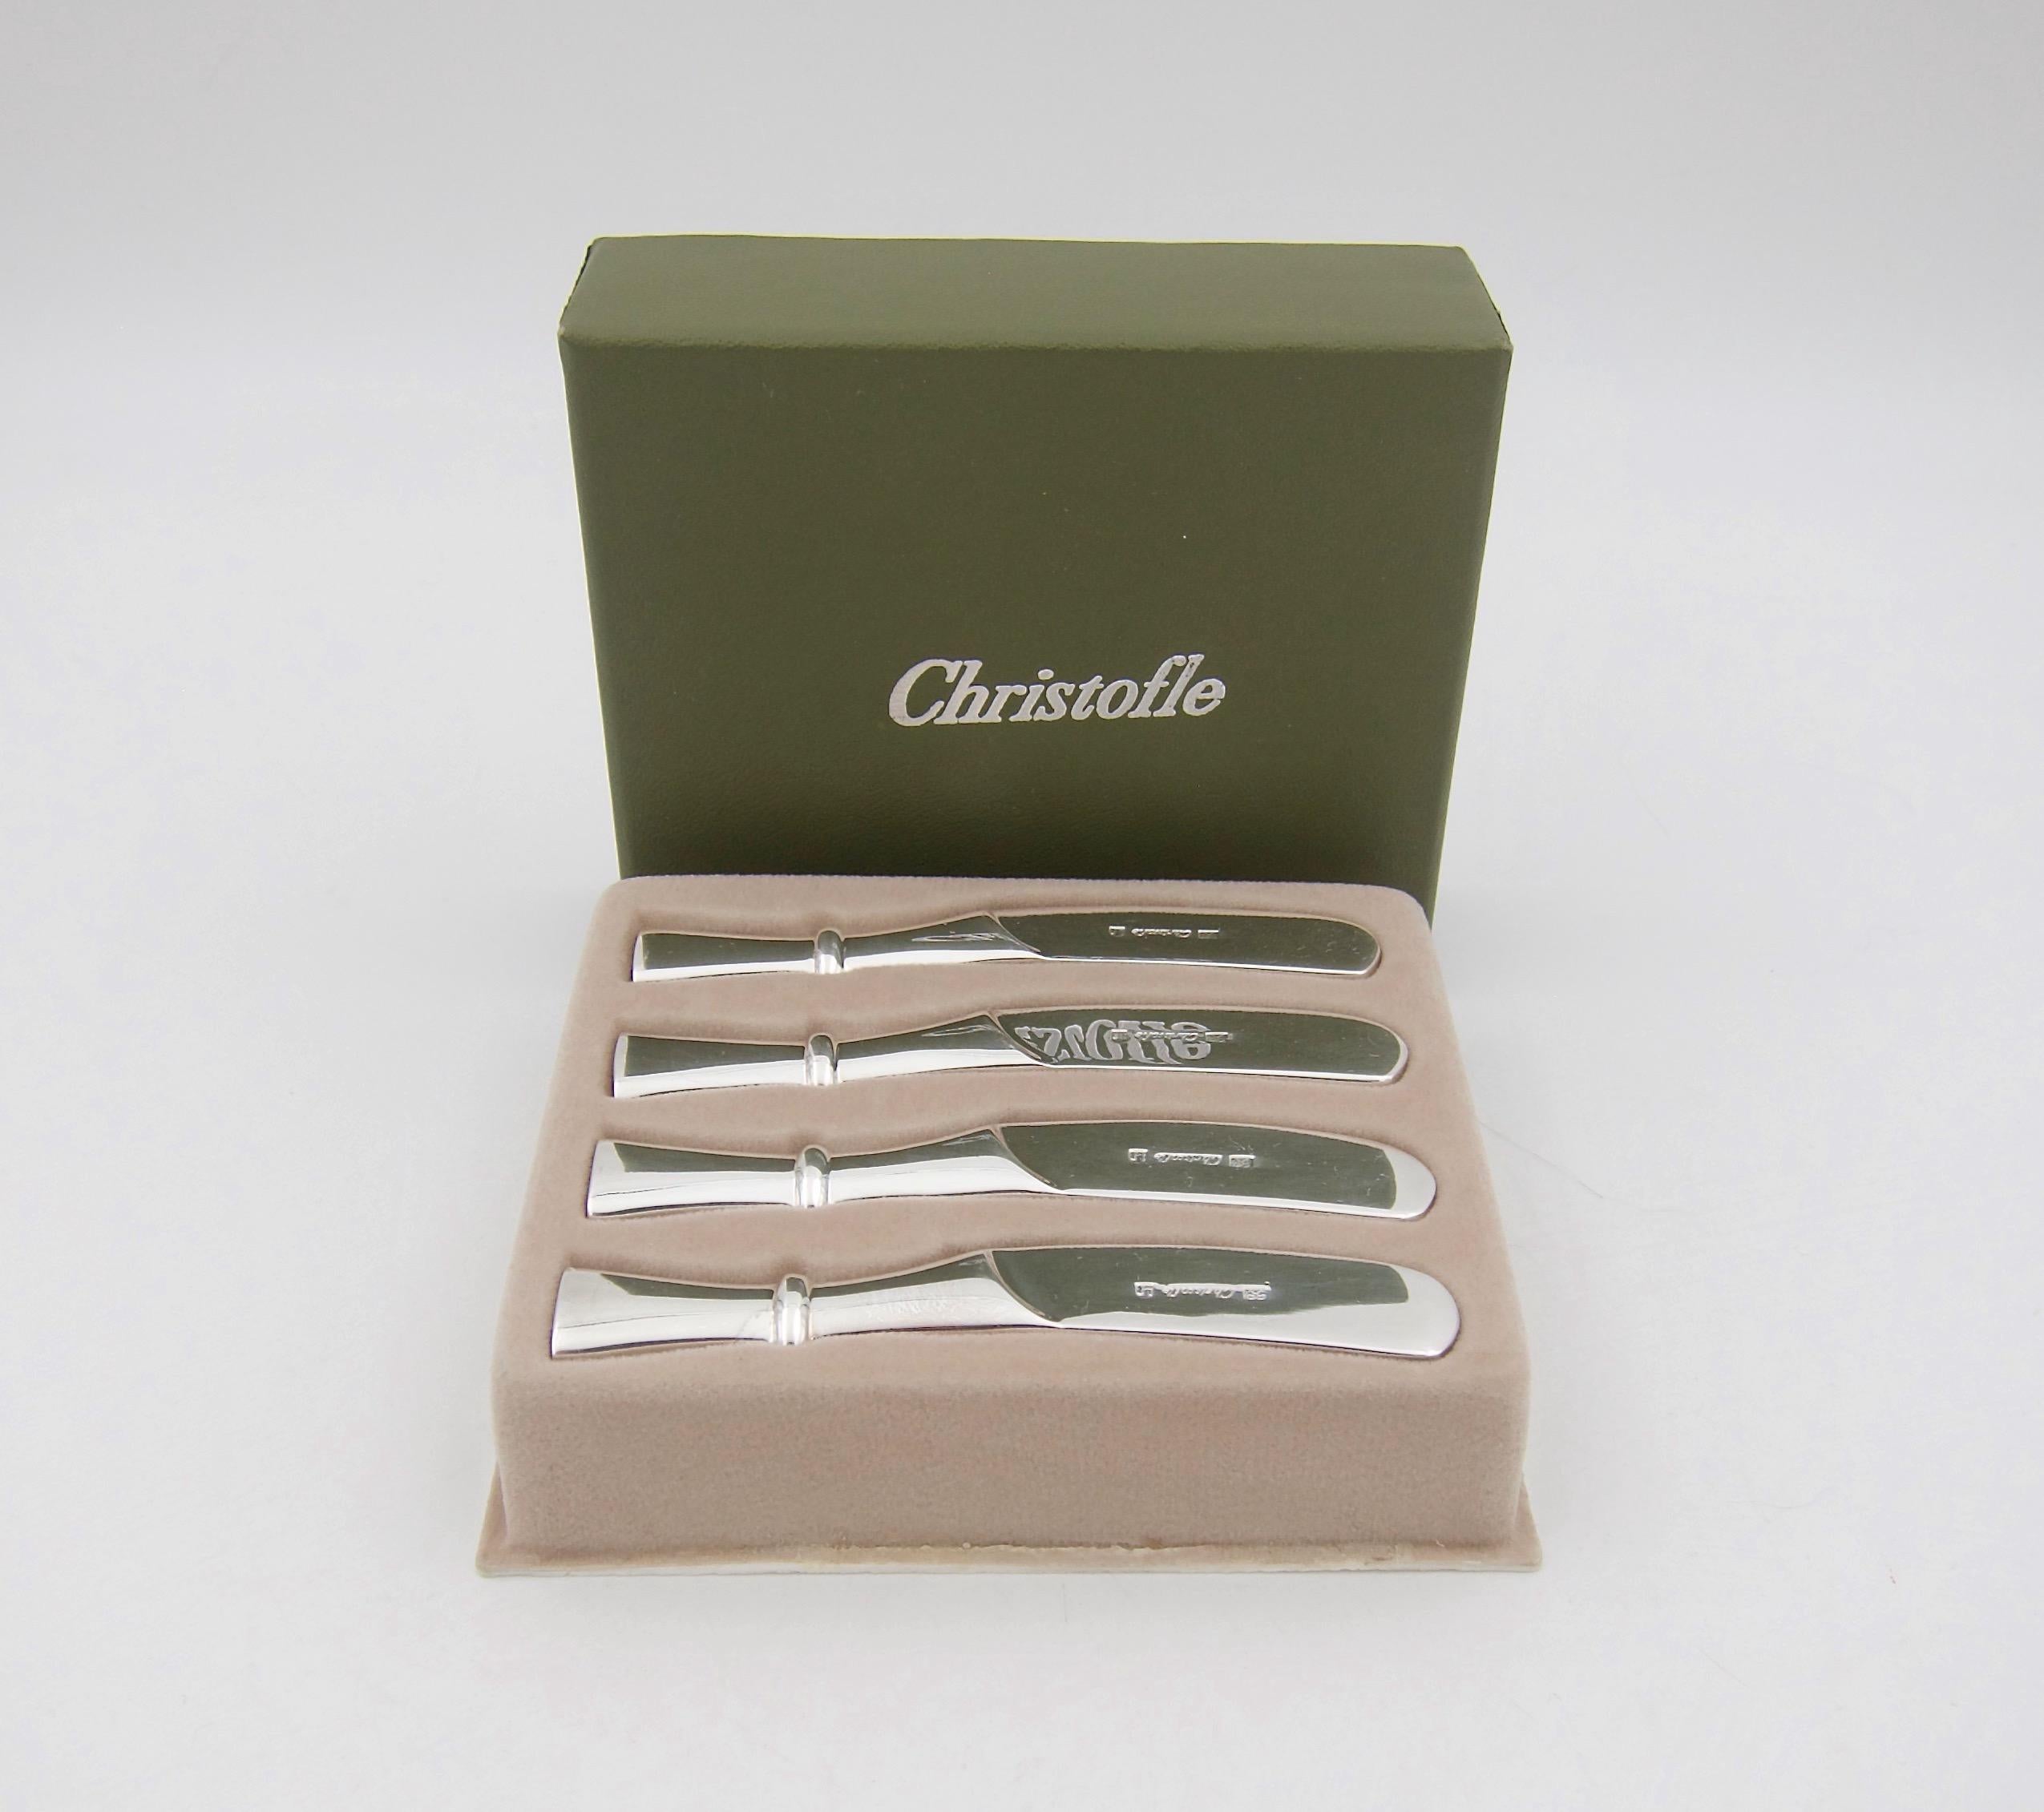 A boxed set of four babylone butter spreader knives in polished silverplate with solid handles from Christofle of Paris. The pattern is called 